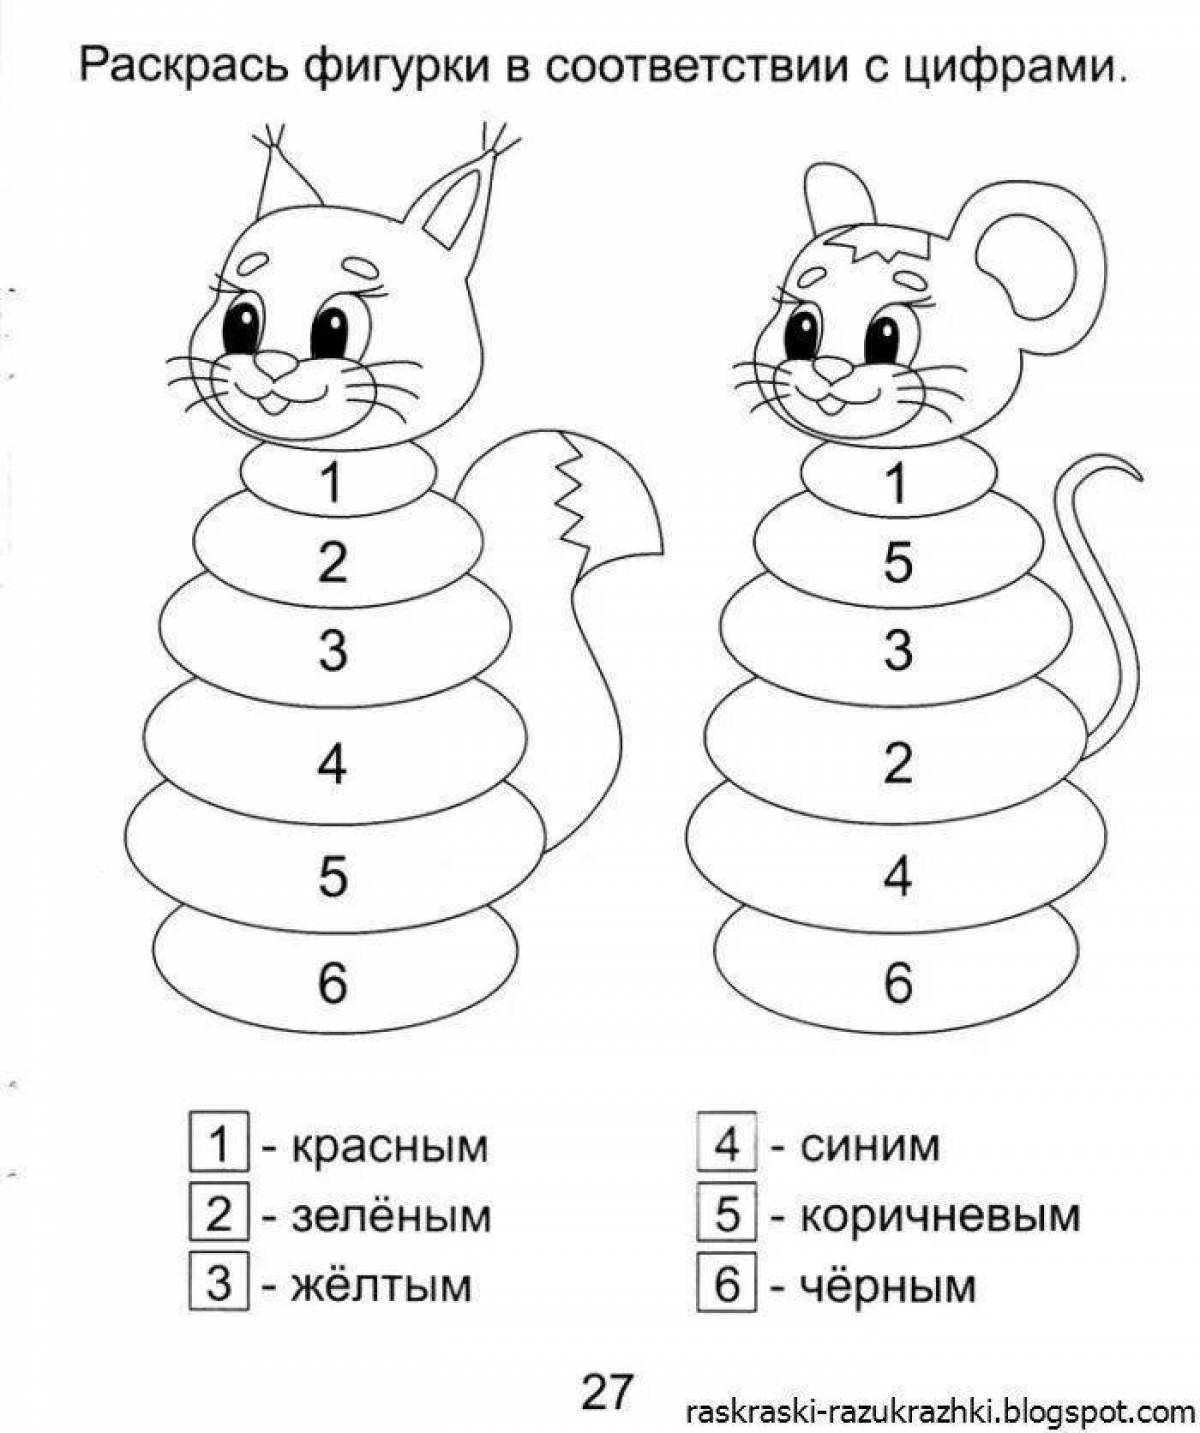 Developing games for children 4 5 years old in Russian #17